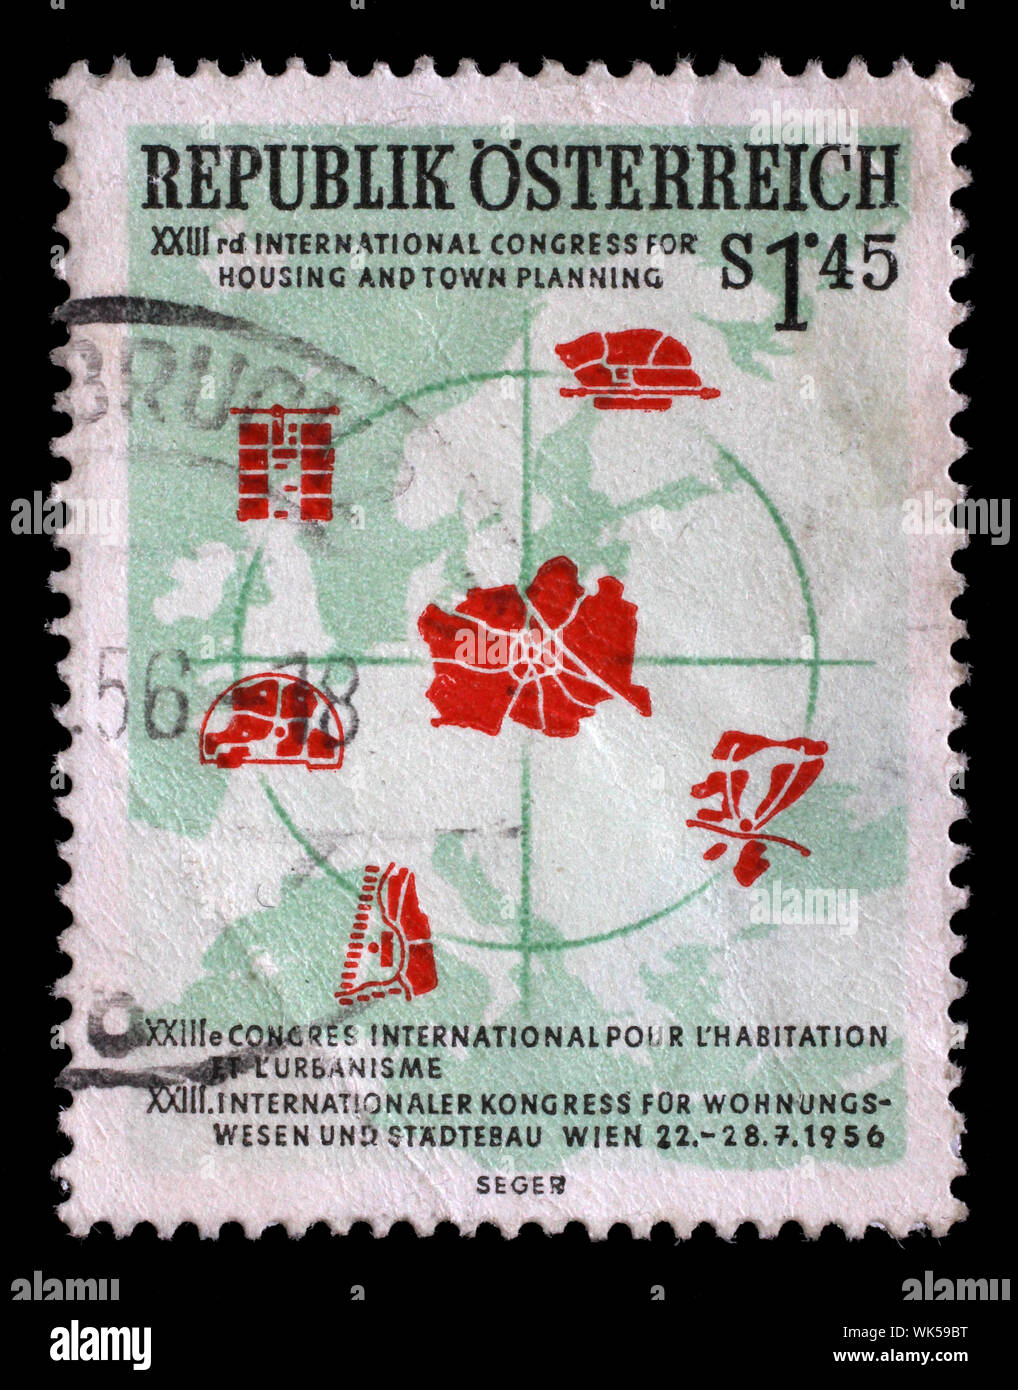 Stamp issued in the Austria shows Map of Europe with city contours, the 23rd International Congress of Urban Planning, Vienna, circa 1956. Stock Photo